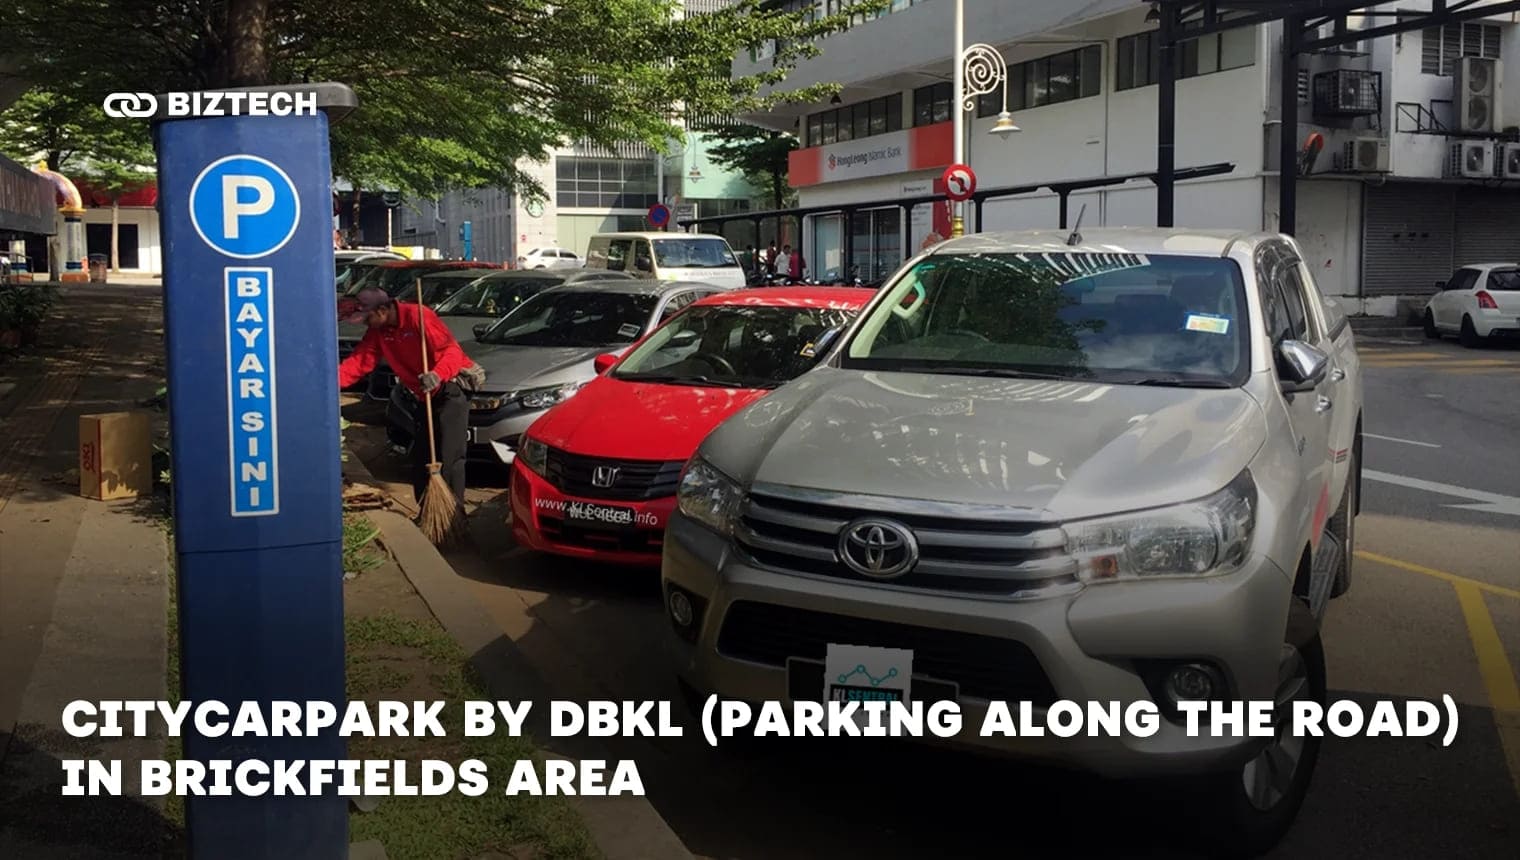 Citycarpark by DBKL (Parking Along the Road) in Brickfields area